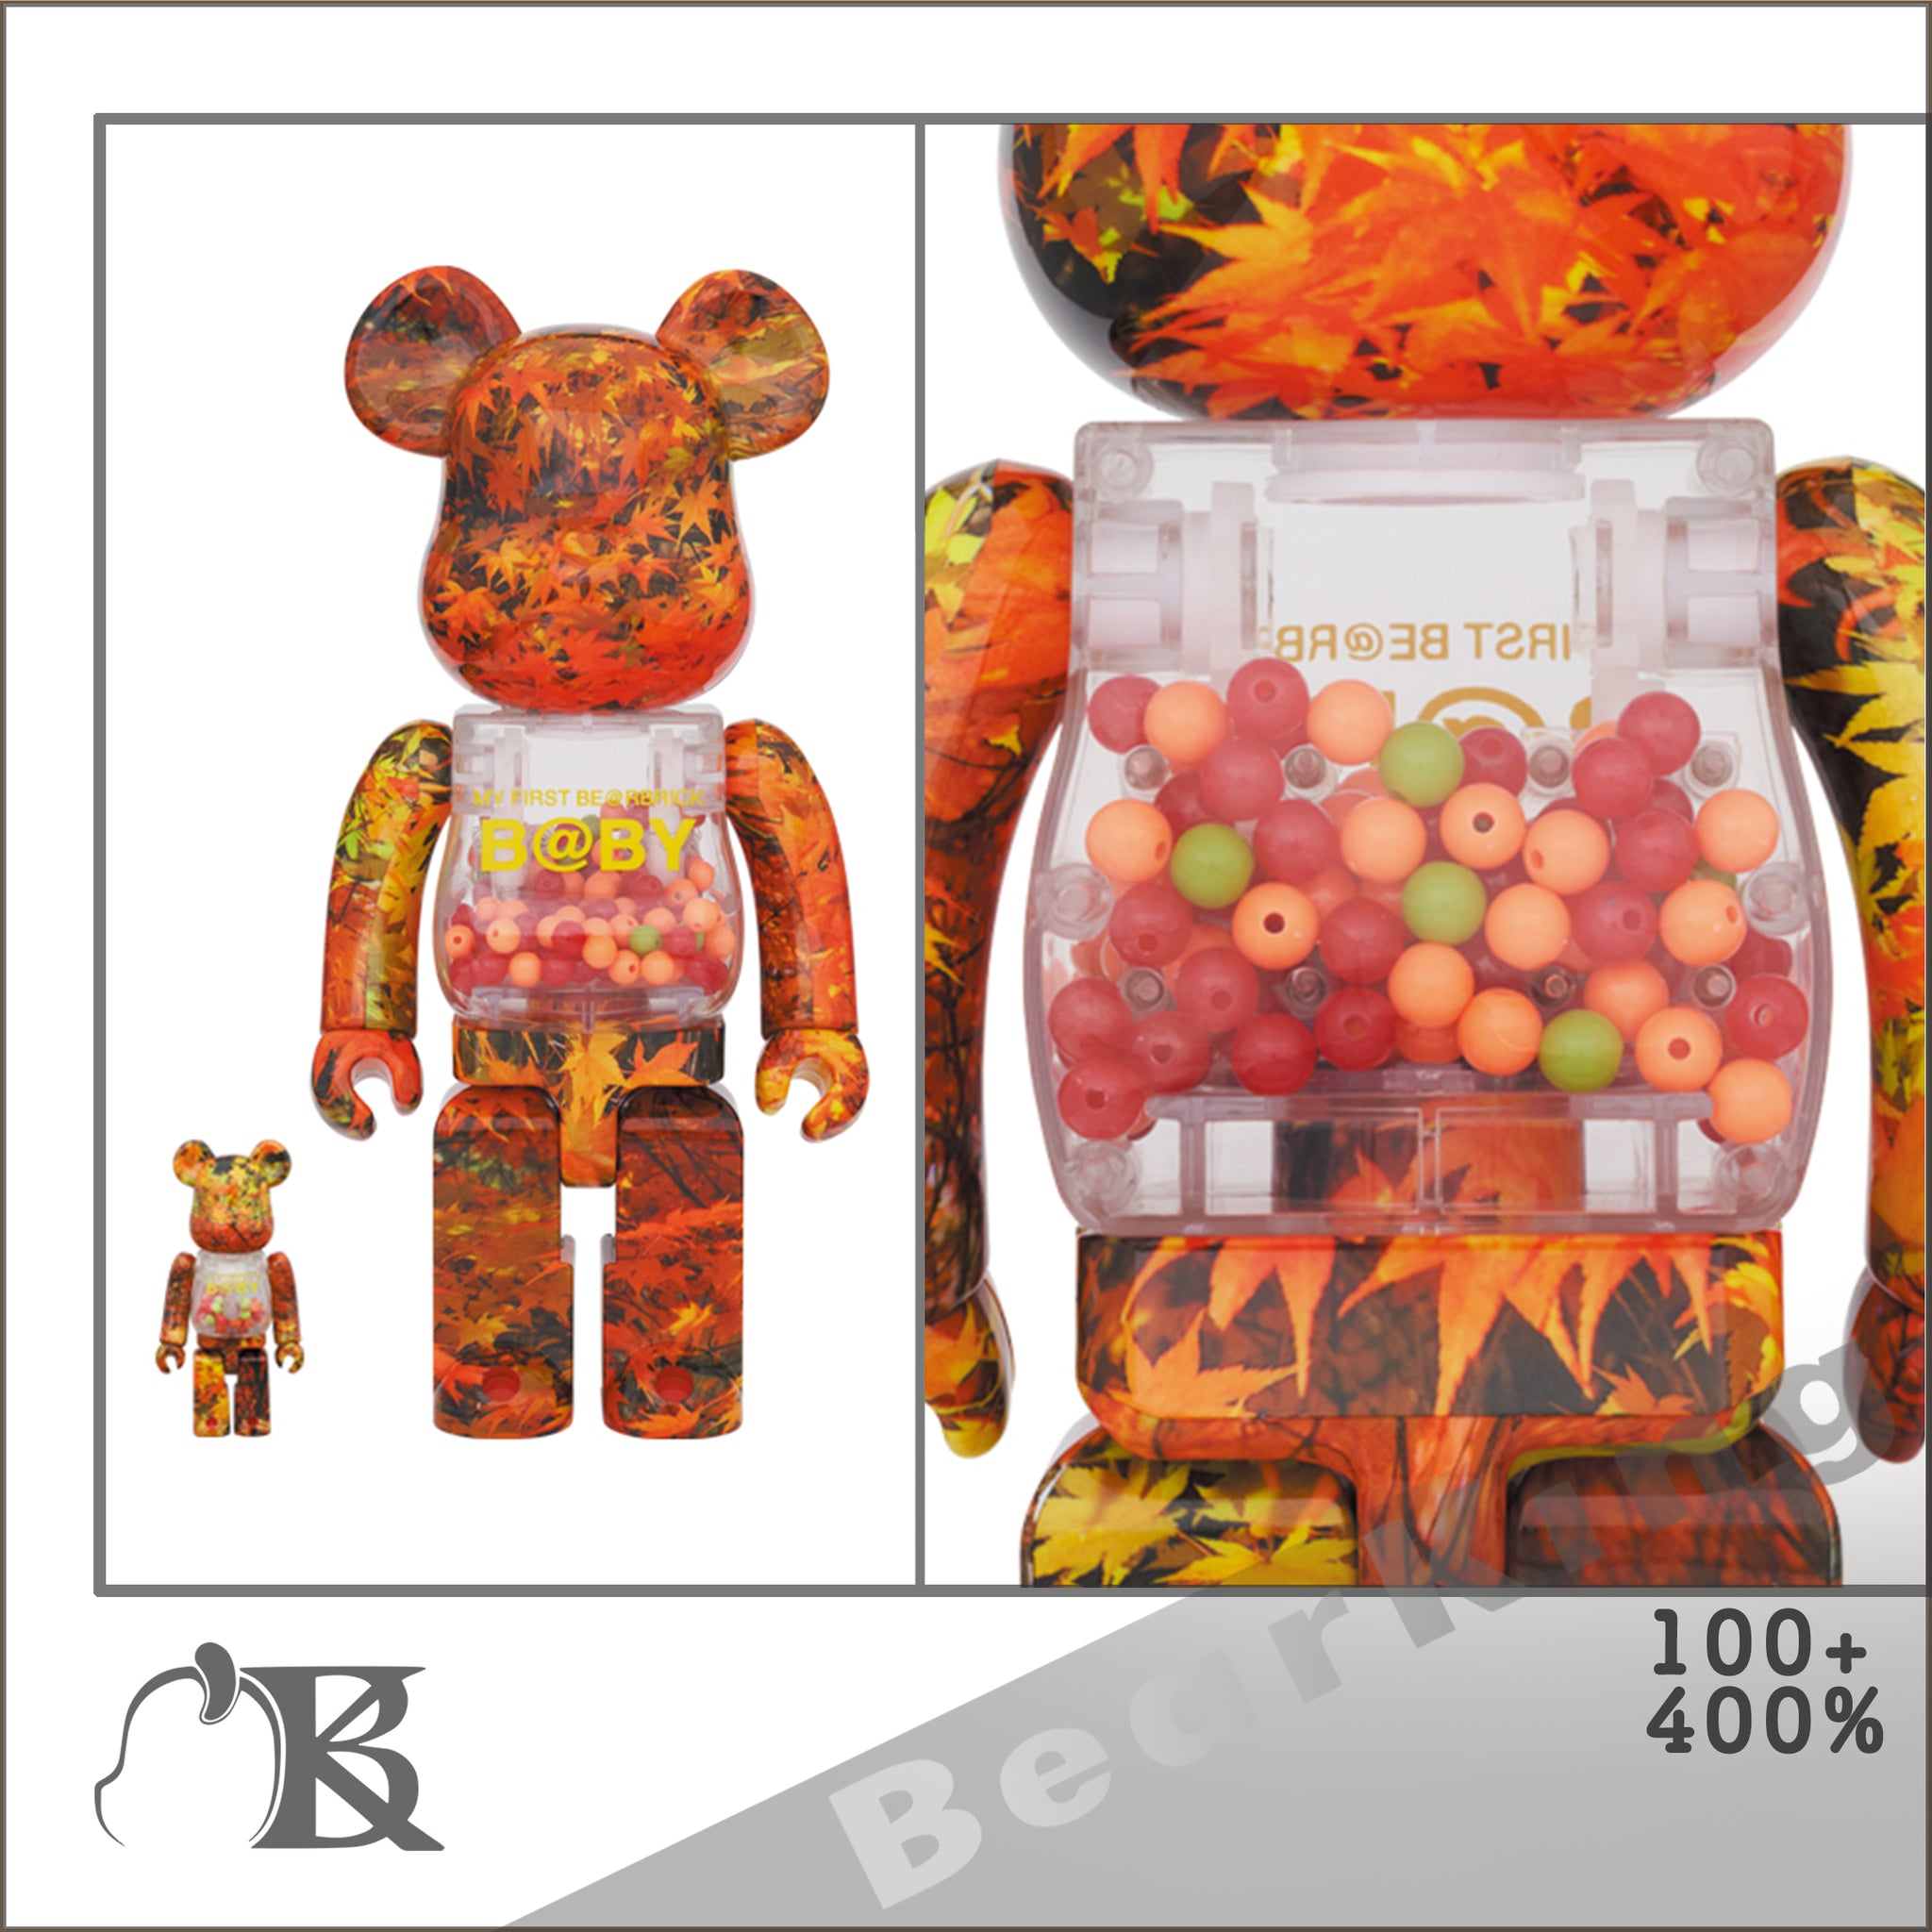 MY FIRST NY@BRICK & R@BBRICK B@BY 100％ & 400％ AUTUMN LEAVES Ver ...